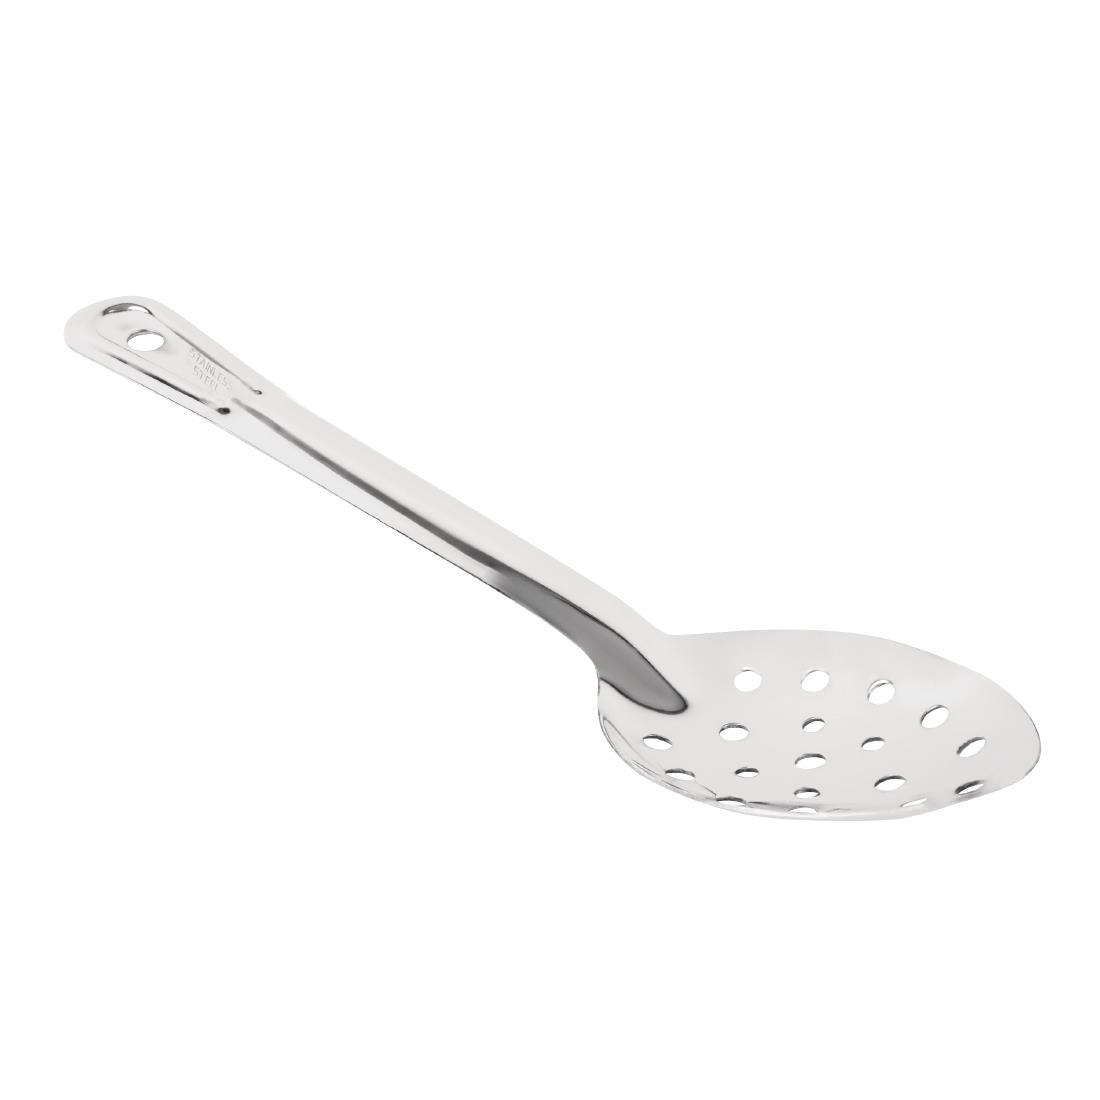 Vogue Perforated Serving Spoon 11" - J631  - 2